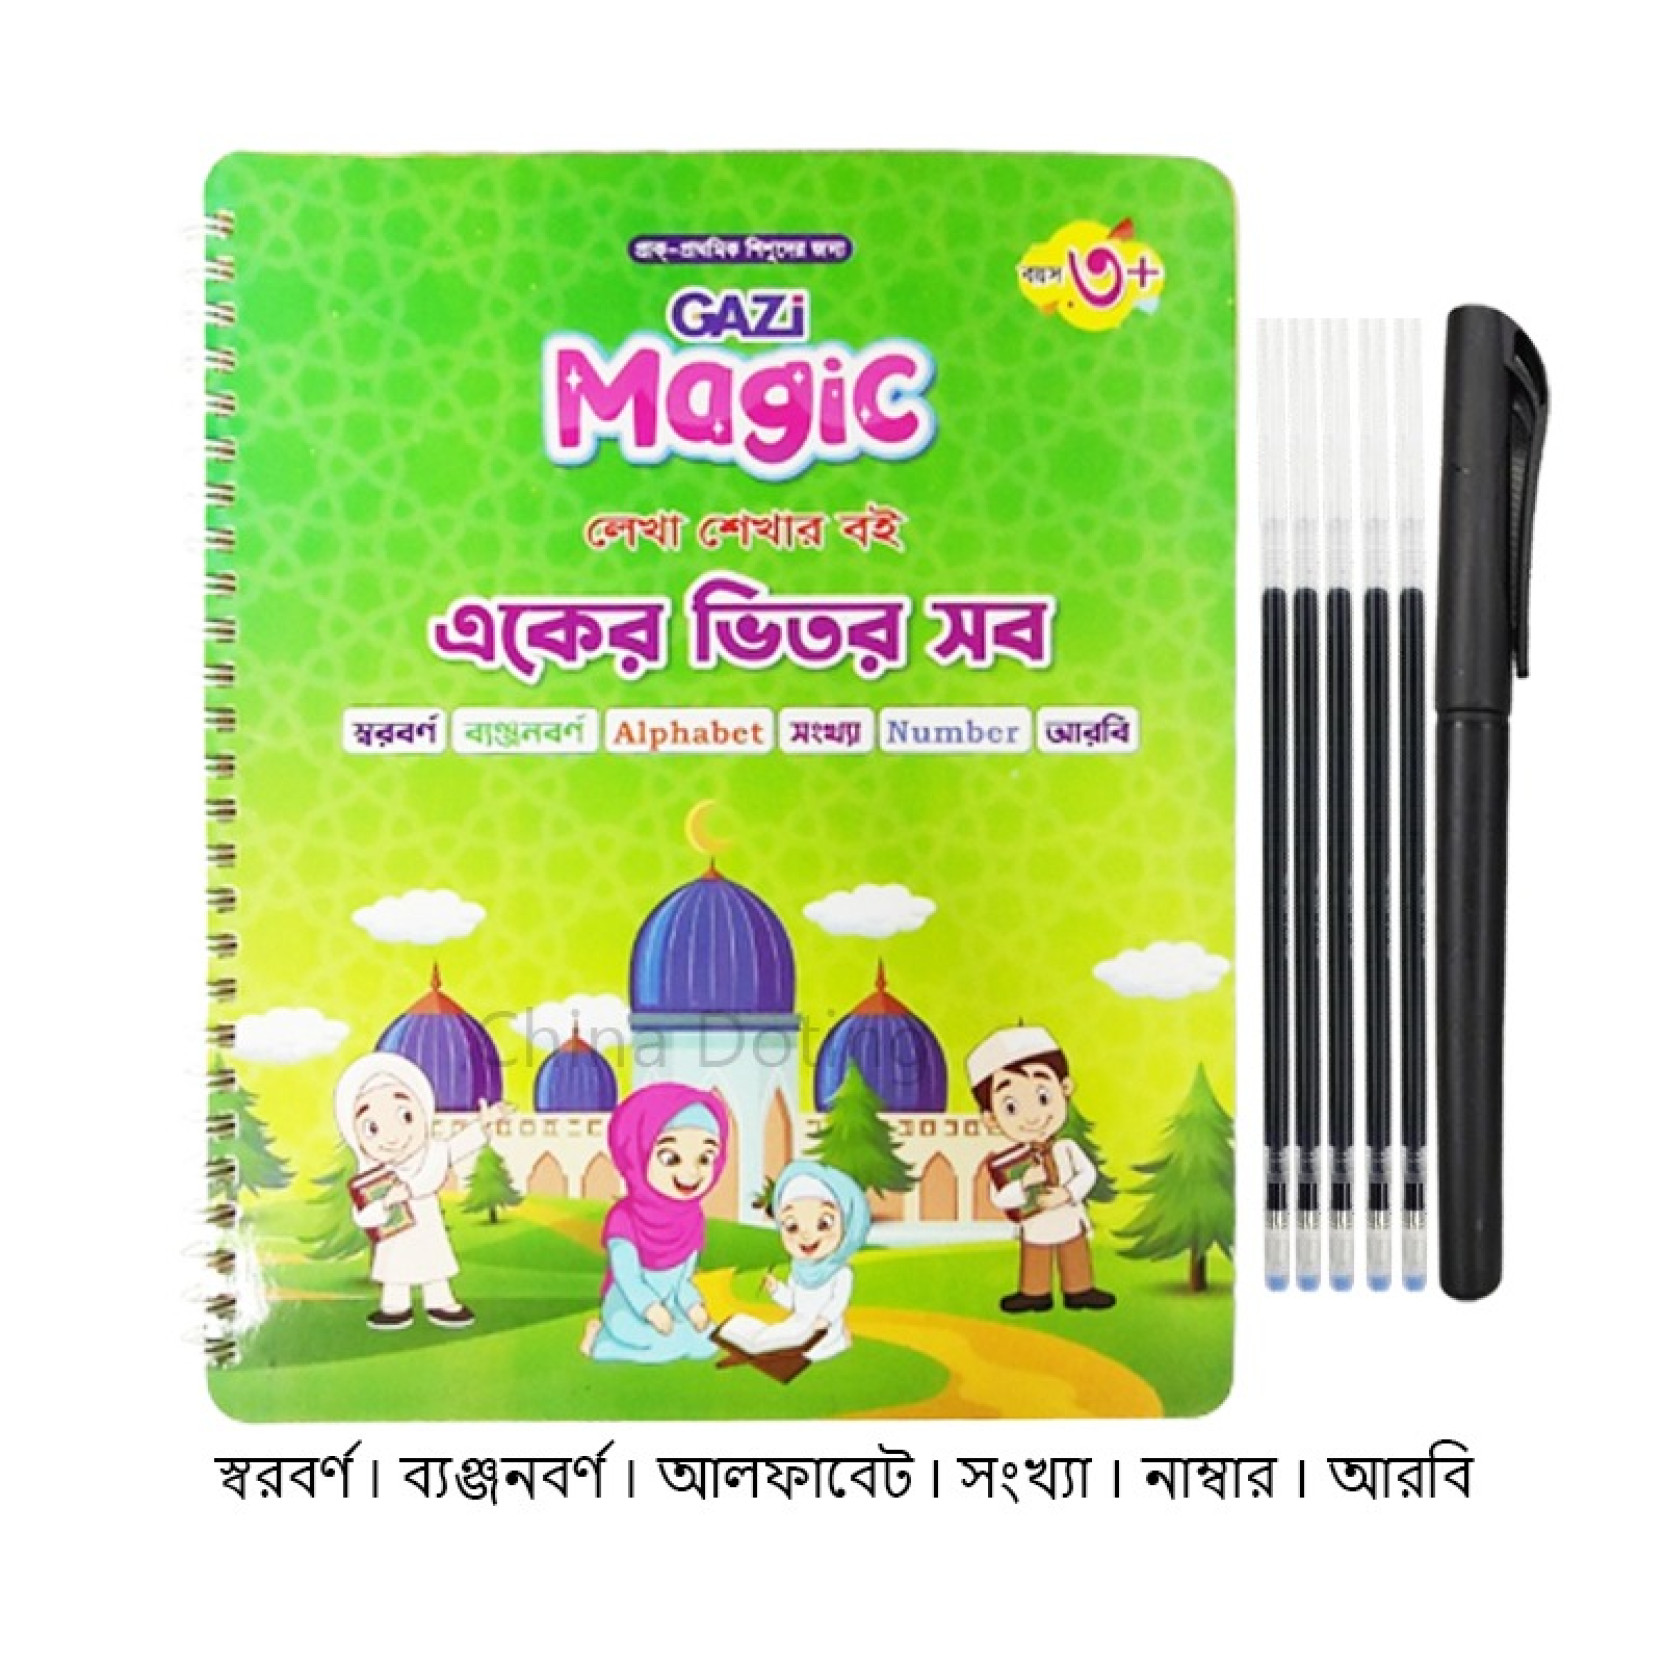 4 PCS Magic Grooved Practice Copybook for Children, Bangladesh